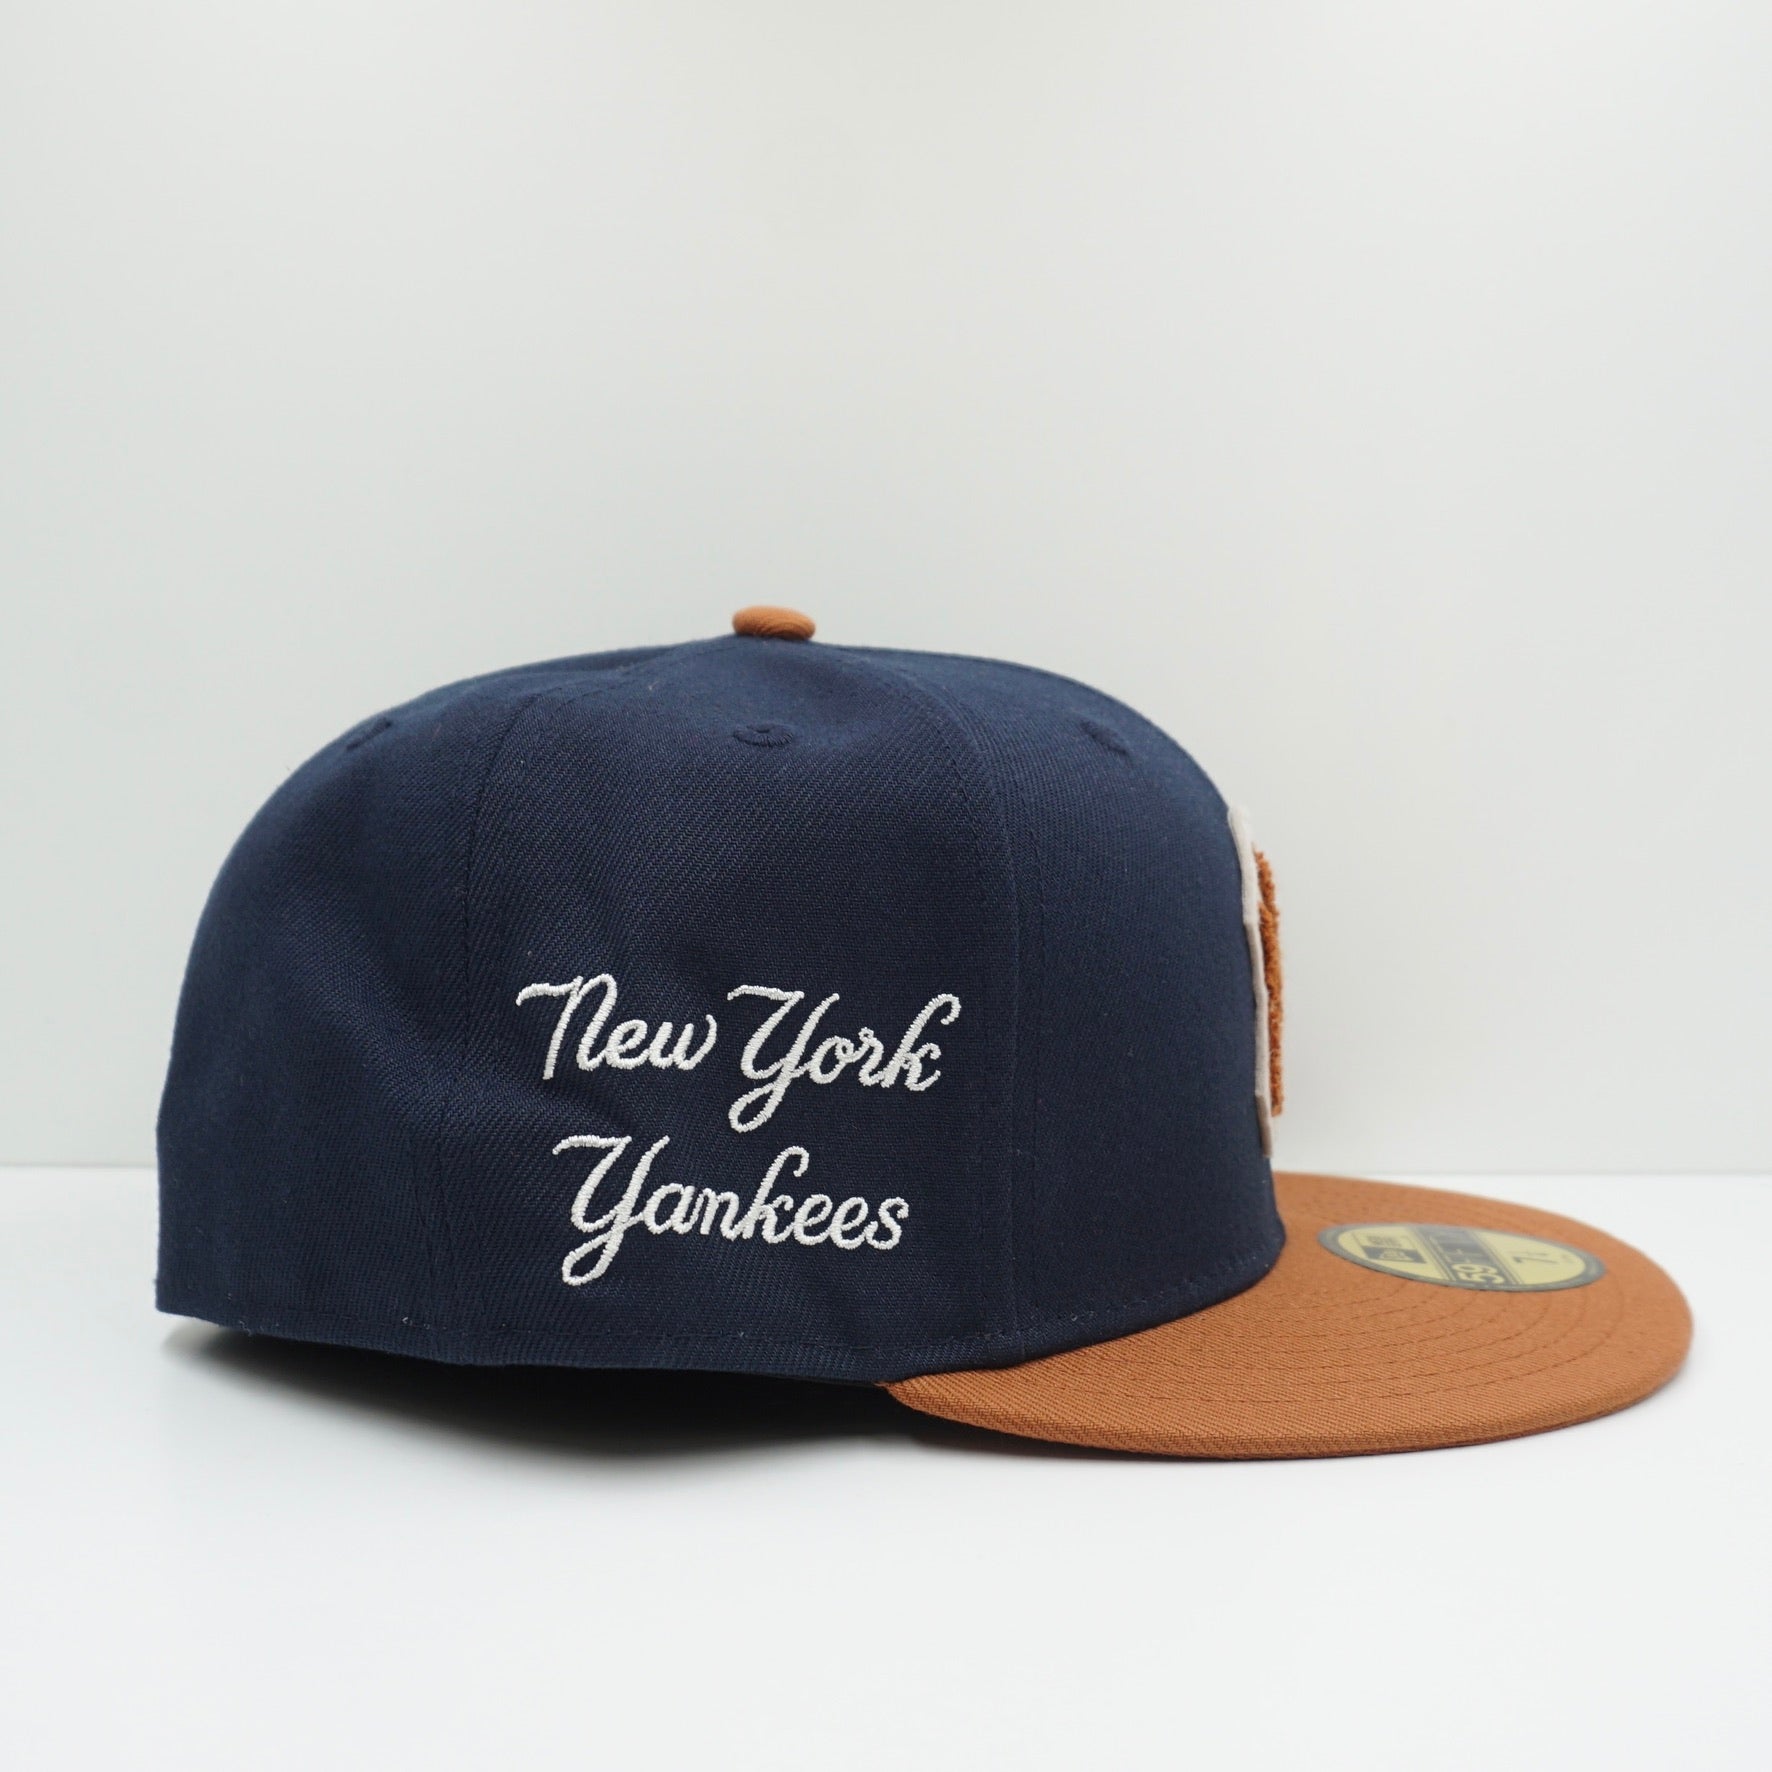 New Era New York Yankees Boucle Navy Brown Fitted Cap